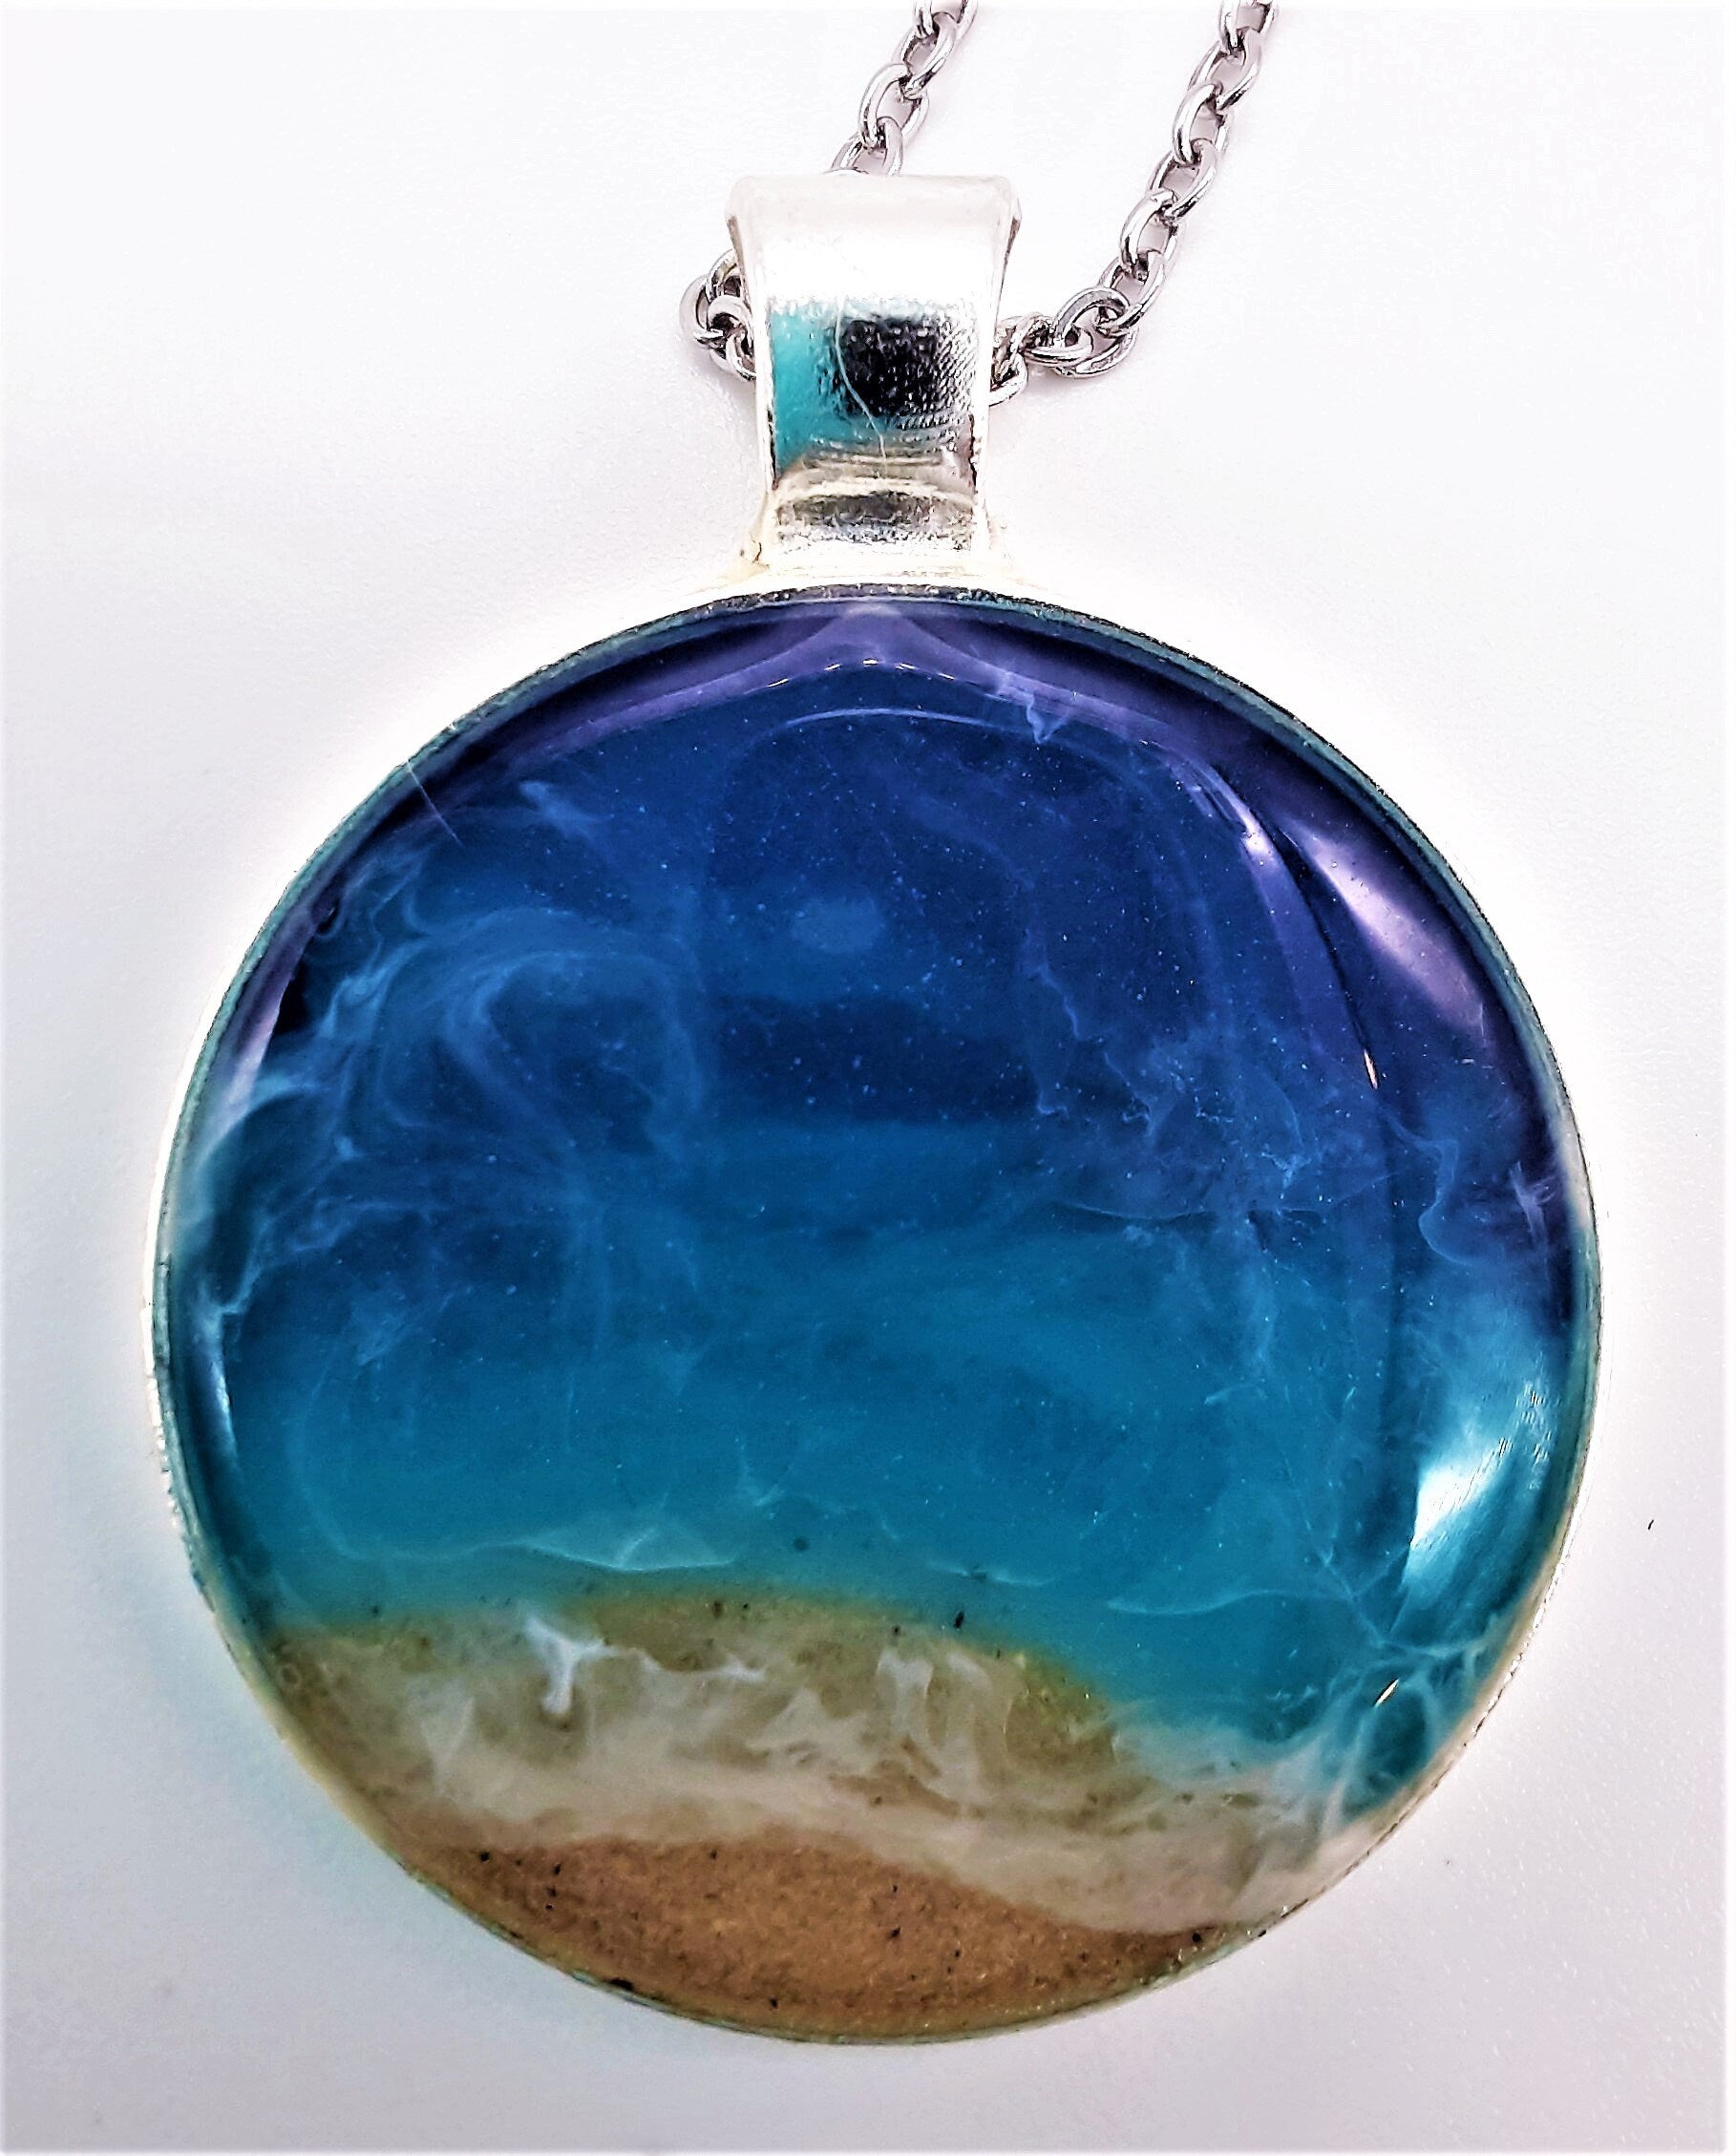 Resin Waves Round Shaped Ocean Pendant / Beach Scene Necklace, Handmade Made with Resin & Real Sand - One of a Kind - Not a Photograph!